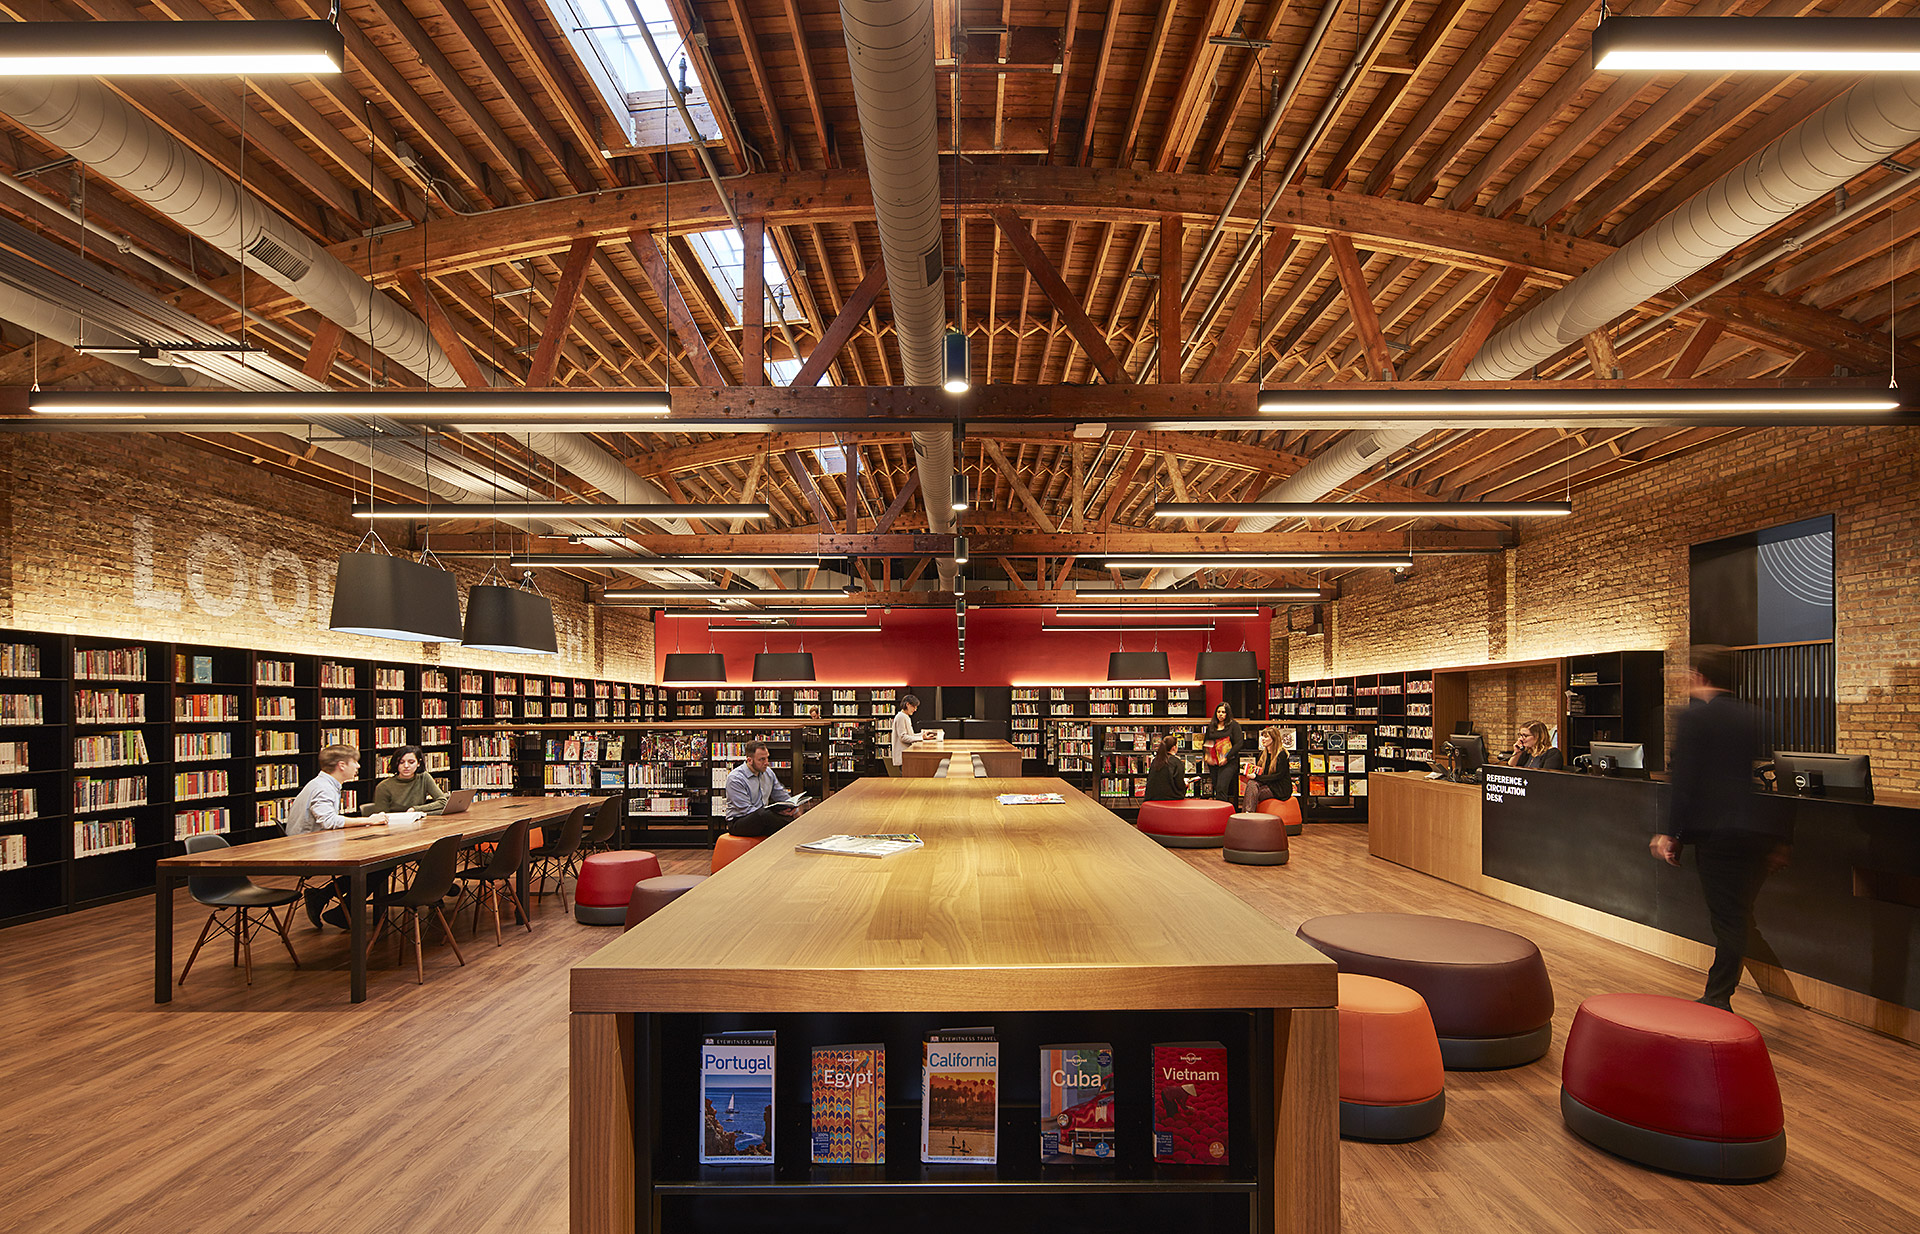 A long, rectangular library space beneath an arched wood timber ceiling. There are tables and chairs for reading the walls are lined with bookshelves. 